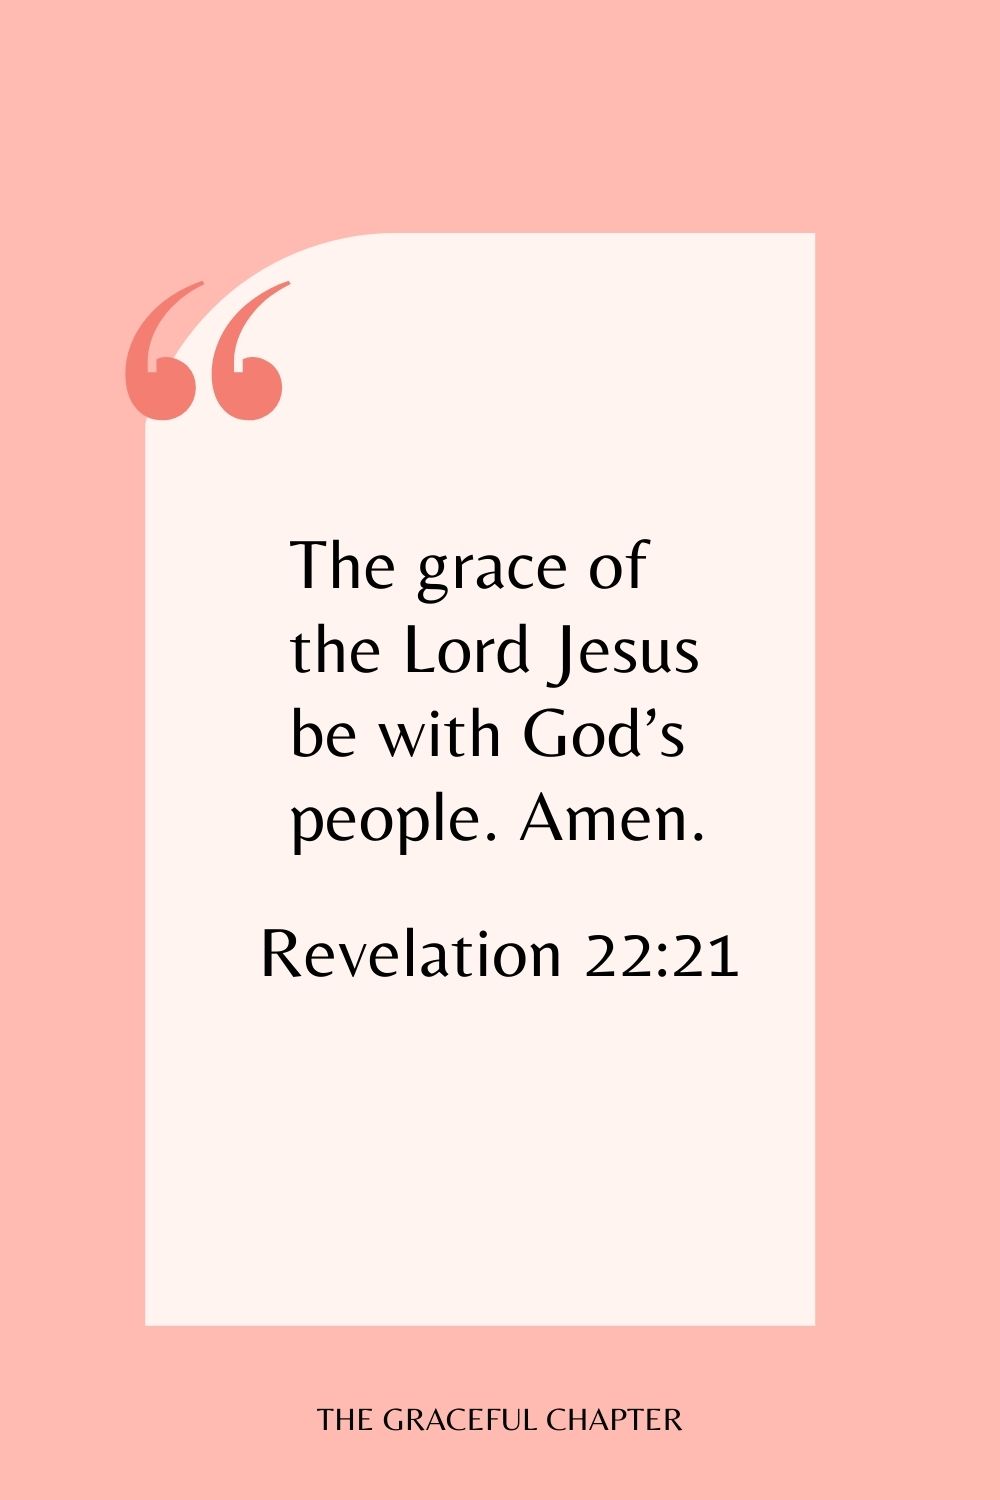 The grace of the Lord Jesus be with God’s people. Amen. Revelation 22:21